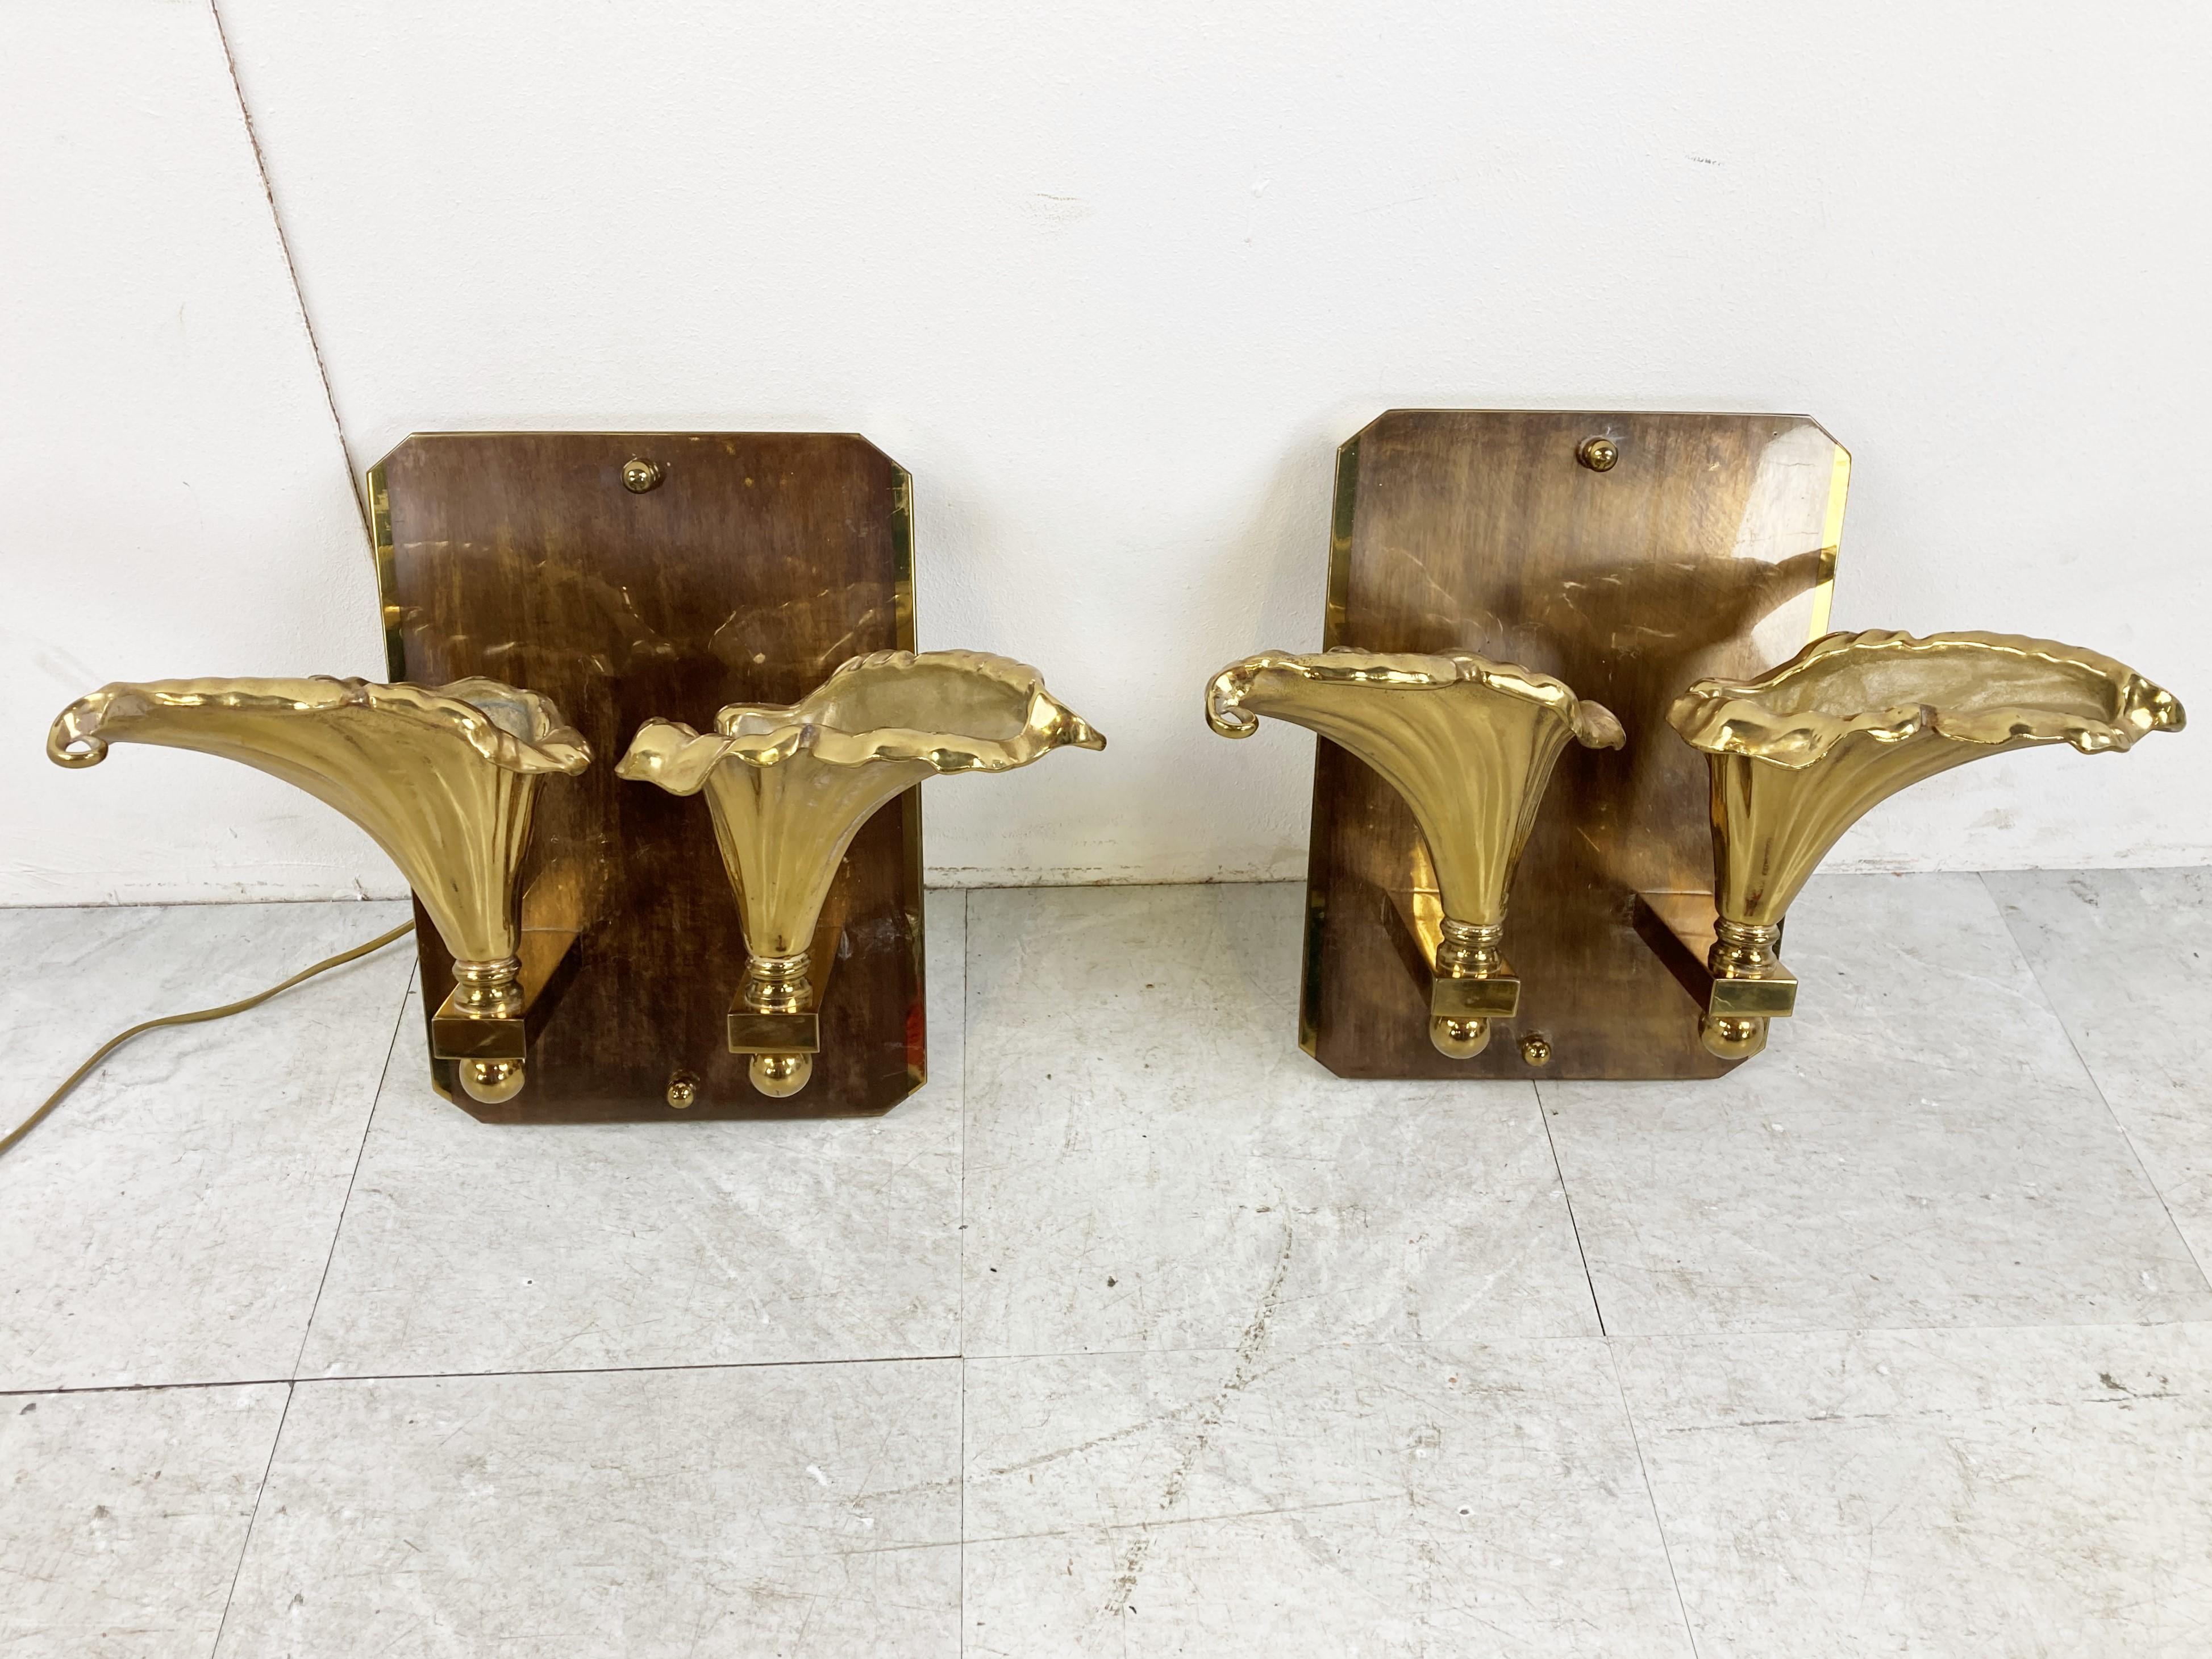 Pair of heavy bronze double flower wall lamps.

The spectacular wall sconces where made in belgium and are beautifully made.

1970s - Belgium

Good condition, tested and ready to use 

Work with GU 10 spots 

Dimension:
Height: